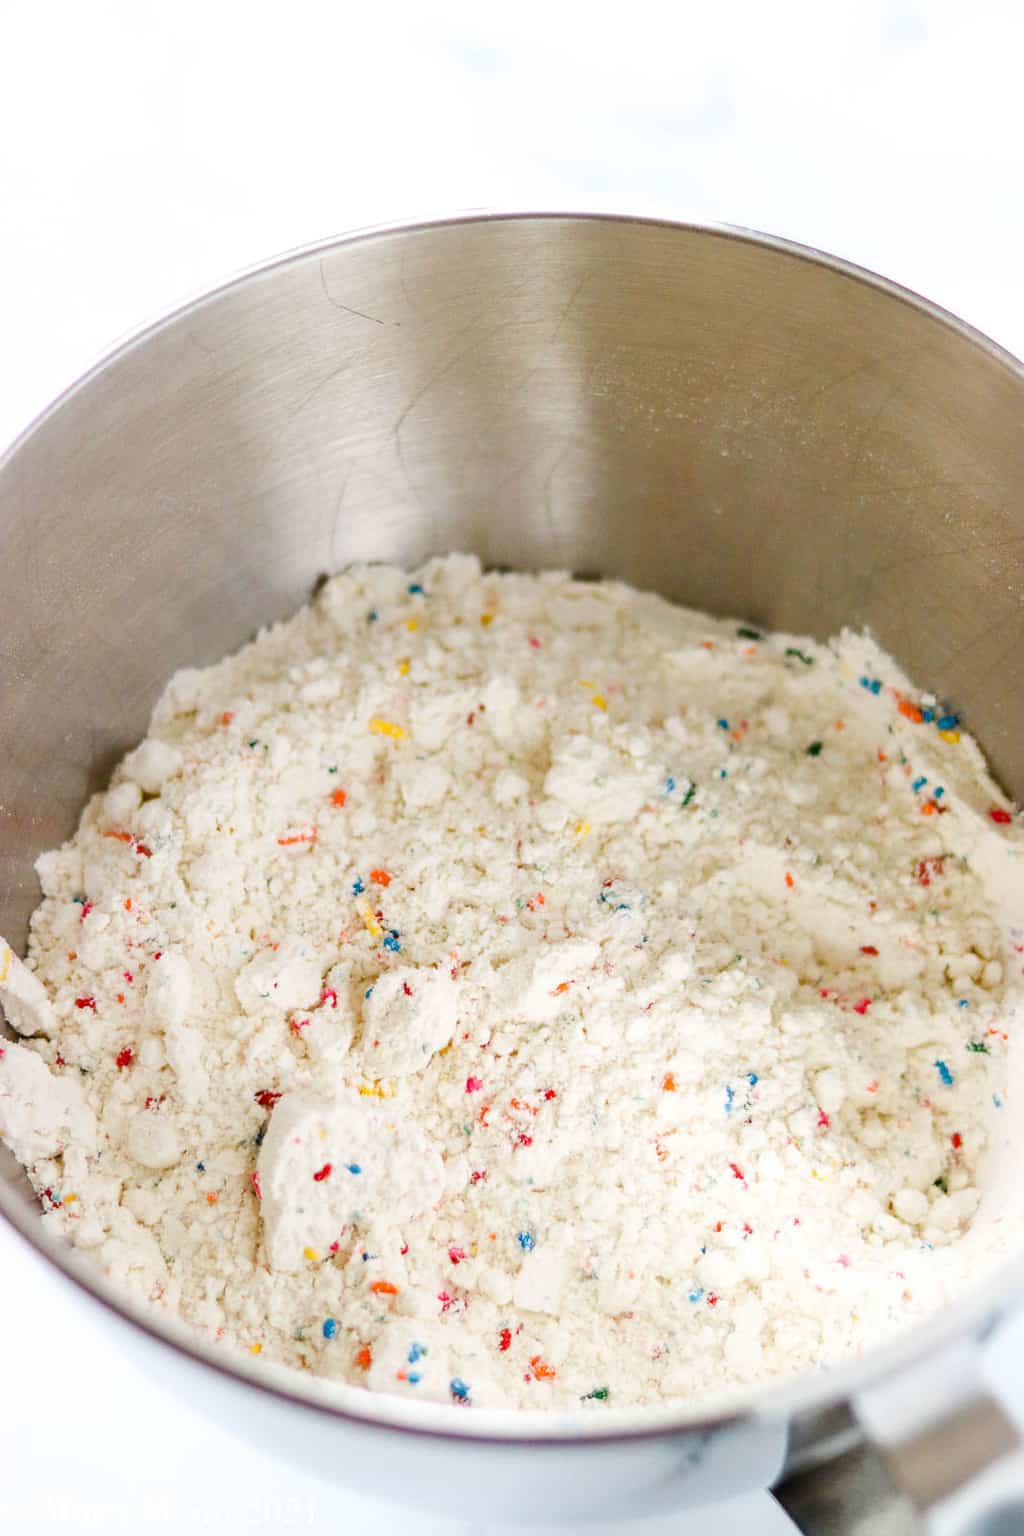 Confetti cake mix, flour, and sugar whisked together in a mixing bowl